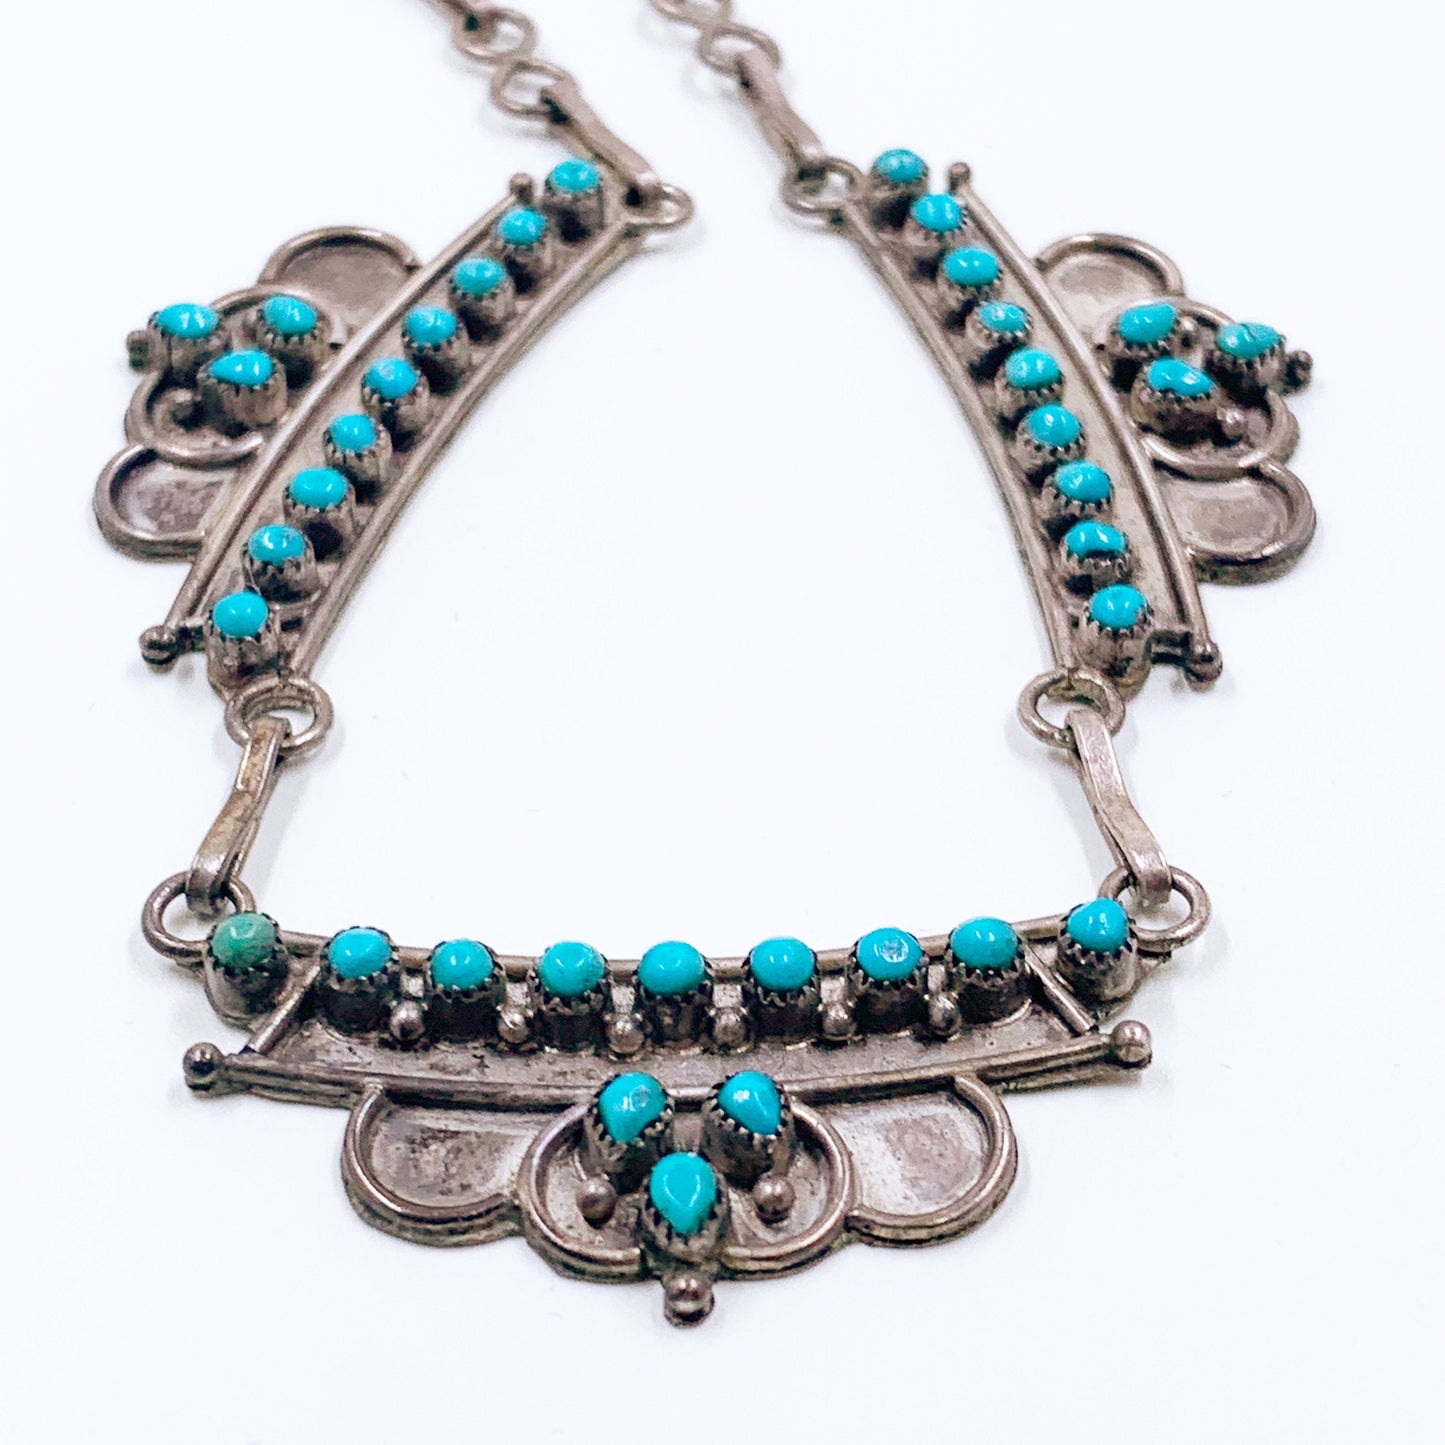 Vintage Snake Eye Turquoise Choker Necklace and Earrings Set